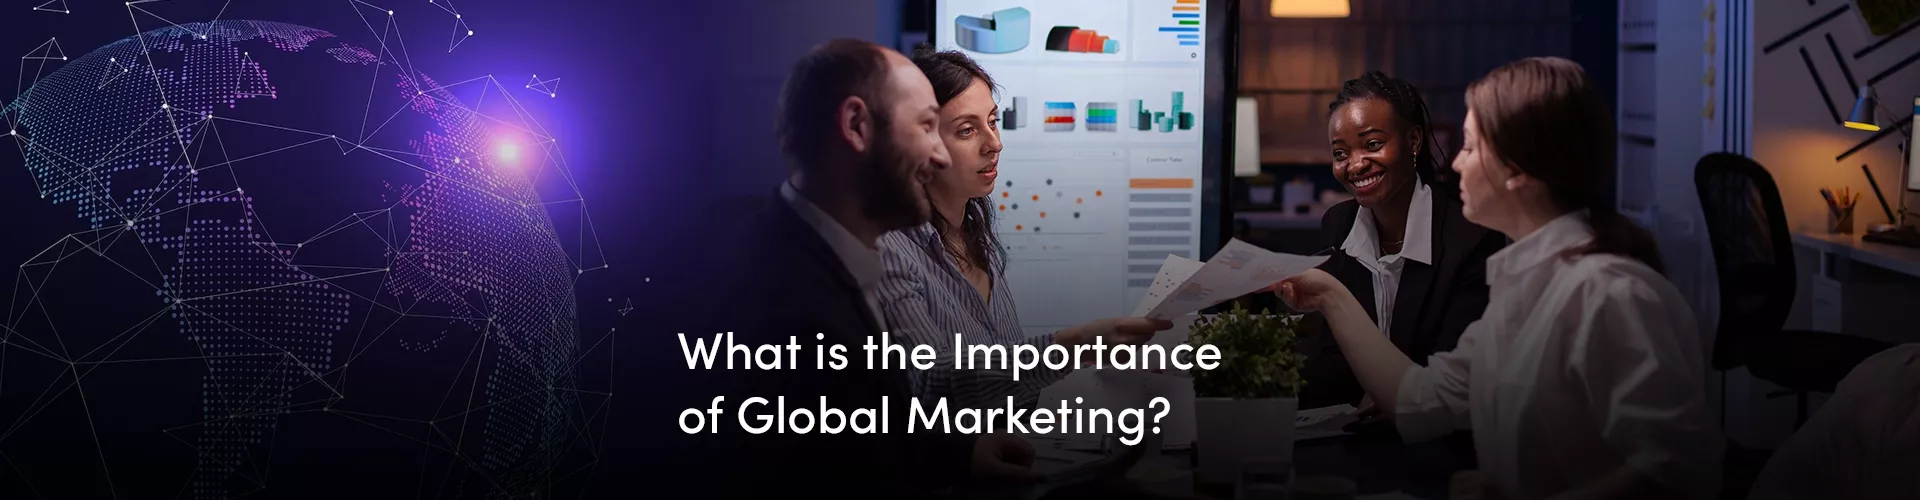 What is the Importance of Global Marketing?